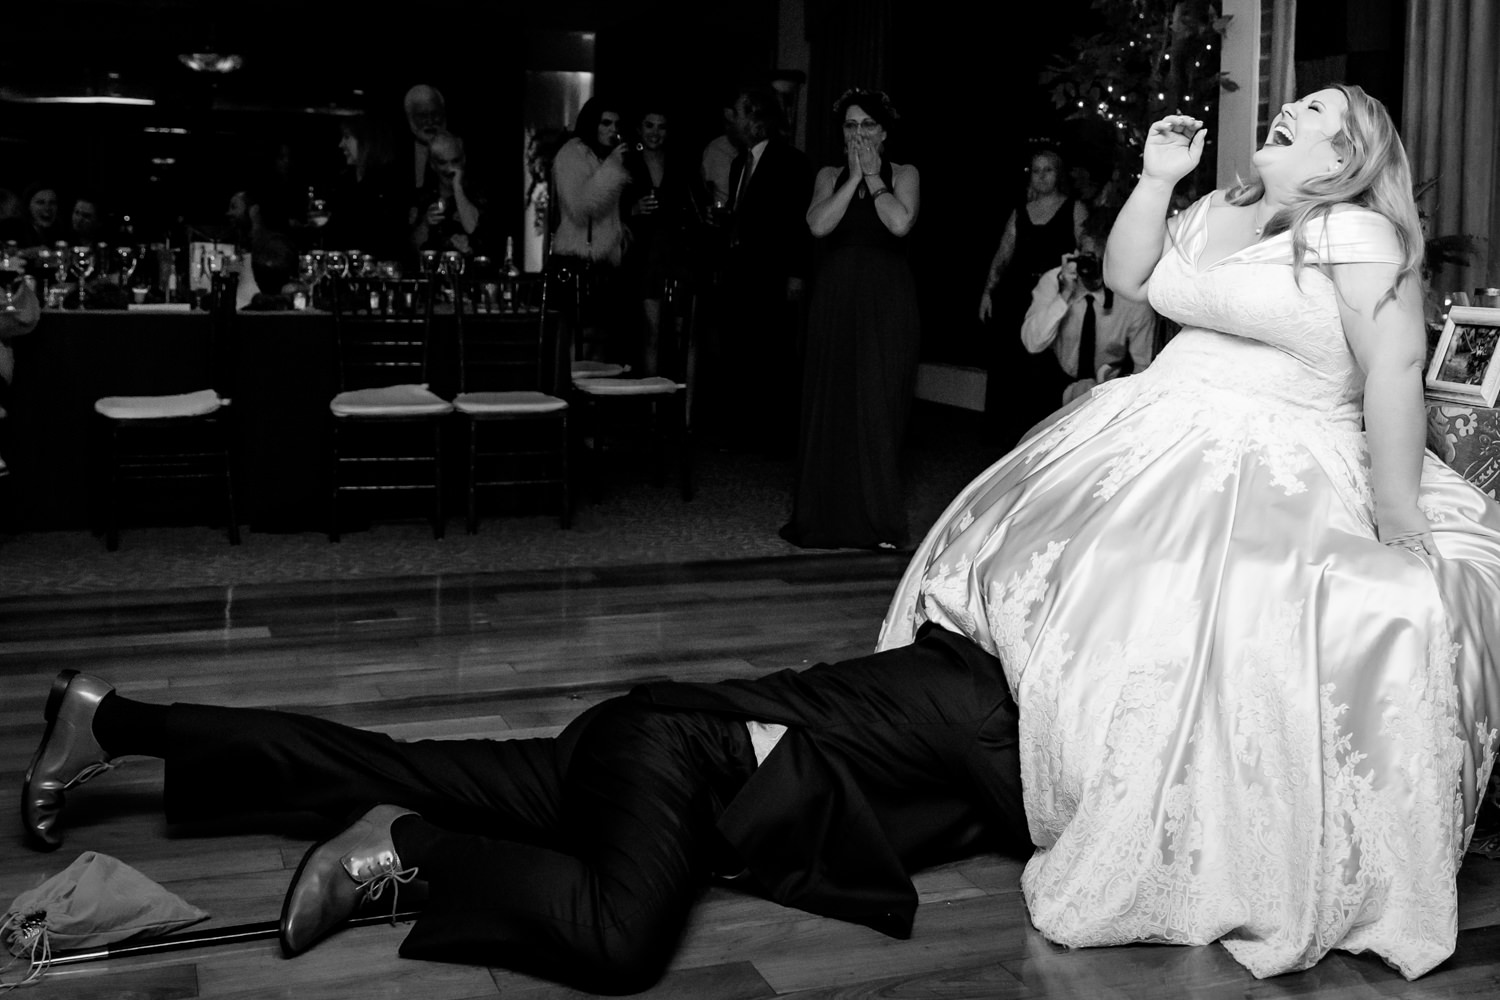 This is a Harbour View Wedding in Woodbridge, Virginia, this is a black and white photo of the groom crawling on the ground under the bride's dress, he is trying to retrieve the garter, she is hysterically laughing that the groom is lost under all of the layers of her dress, Procopio Photography, best top Washington DC photographer, best top Maryland photographer, best top Virginia photographer, best top DMV photographer, best top wedding photographer, best top commercial photographer, best top portrait photographer, best top boudoir photographer, modern fine art portraits, dramatic, unique, different, bold, editorial, photojournalism, award winning photographer, published photographer, memorable images, be different, stand out